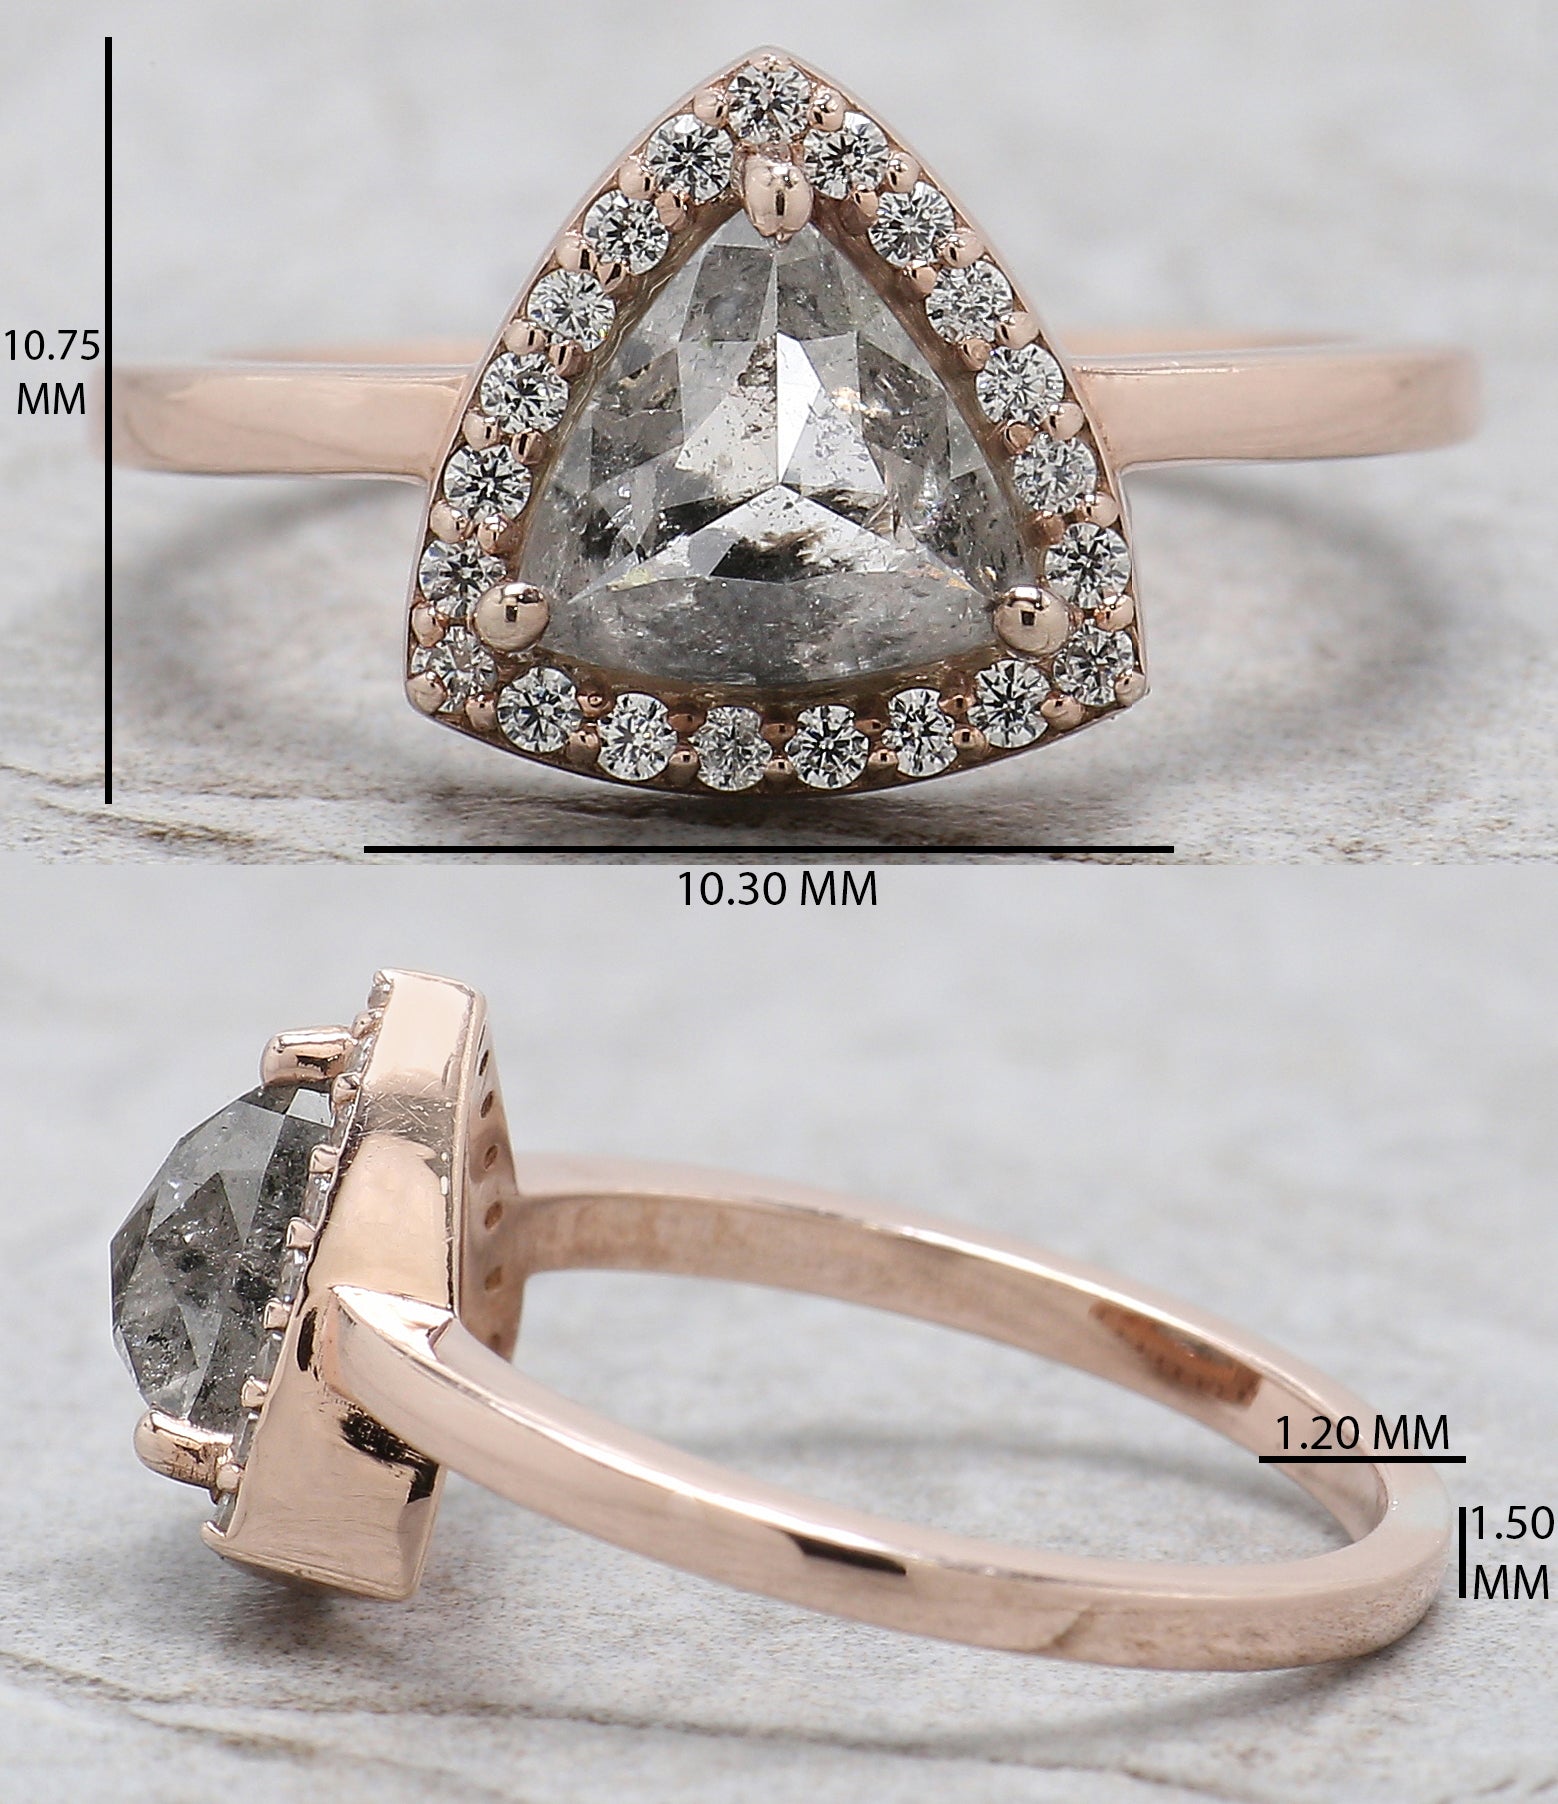 Triangle Salt And Pepper Diamond Ring 1.62 Ct 7.00 MM Triangle Diamond Ring 14K Solid Rose Gold Silver Engagement Ring Gift For Her QL128